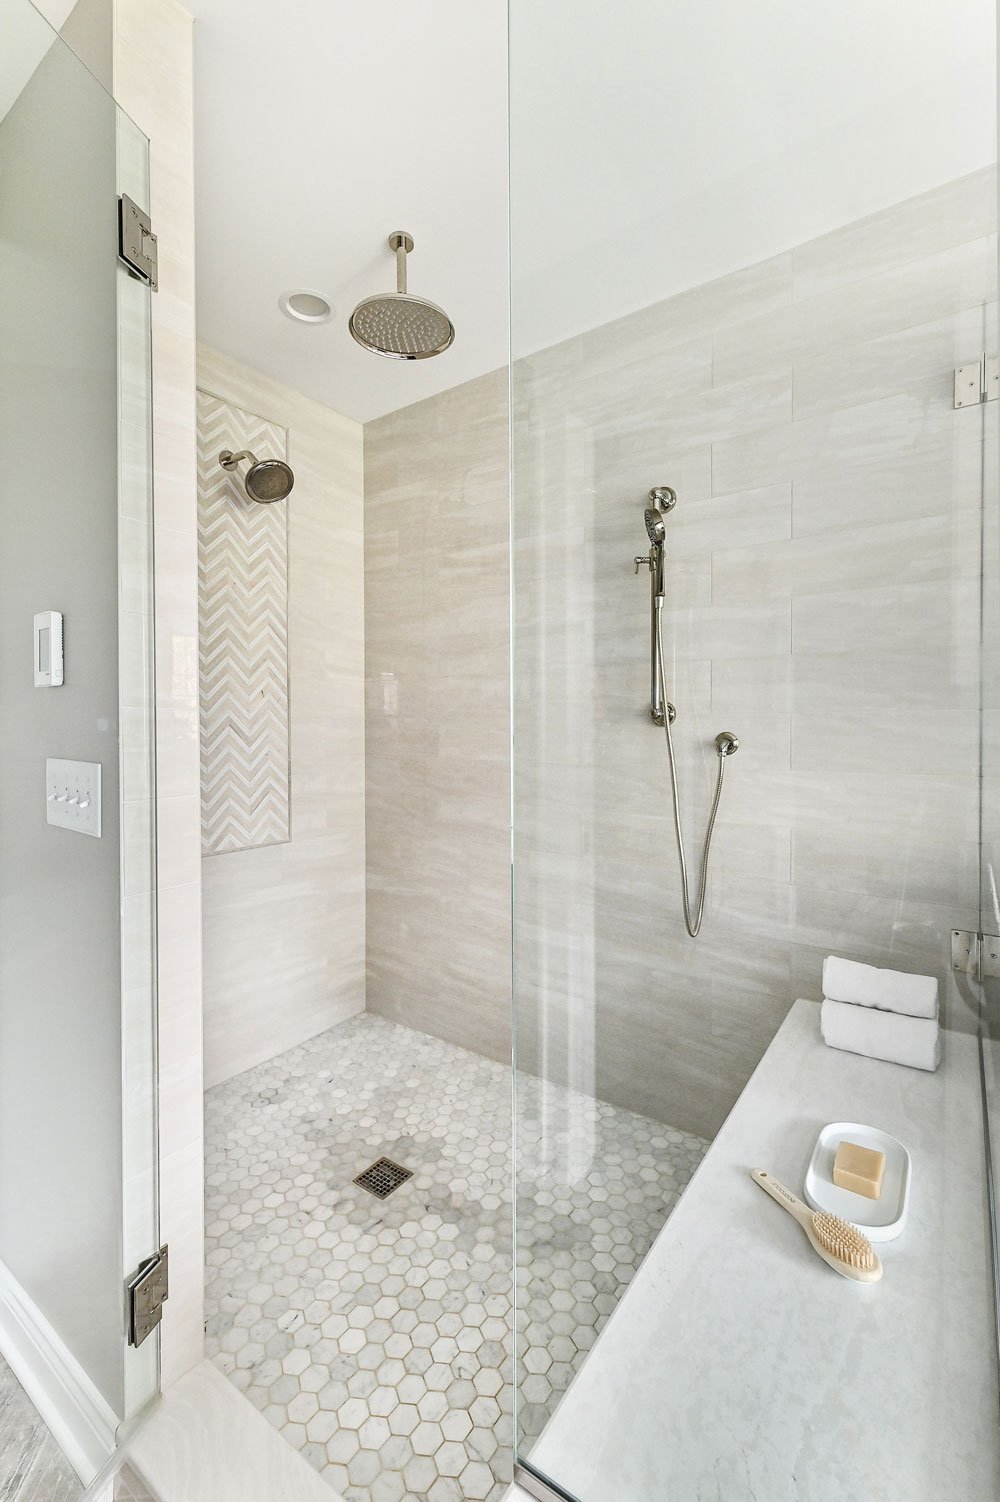 walk-in tiled shower with rainhead